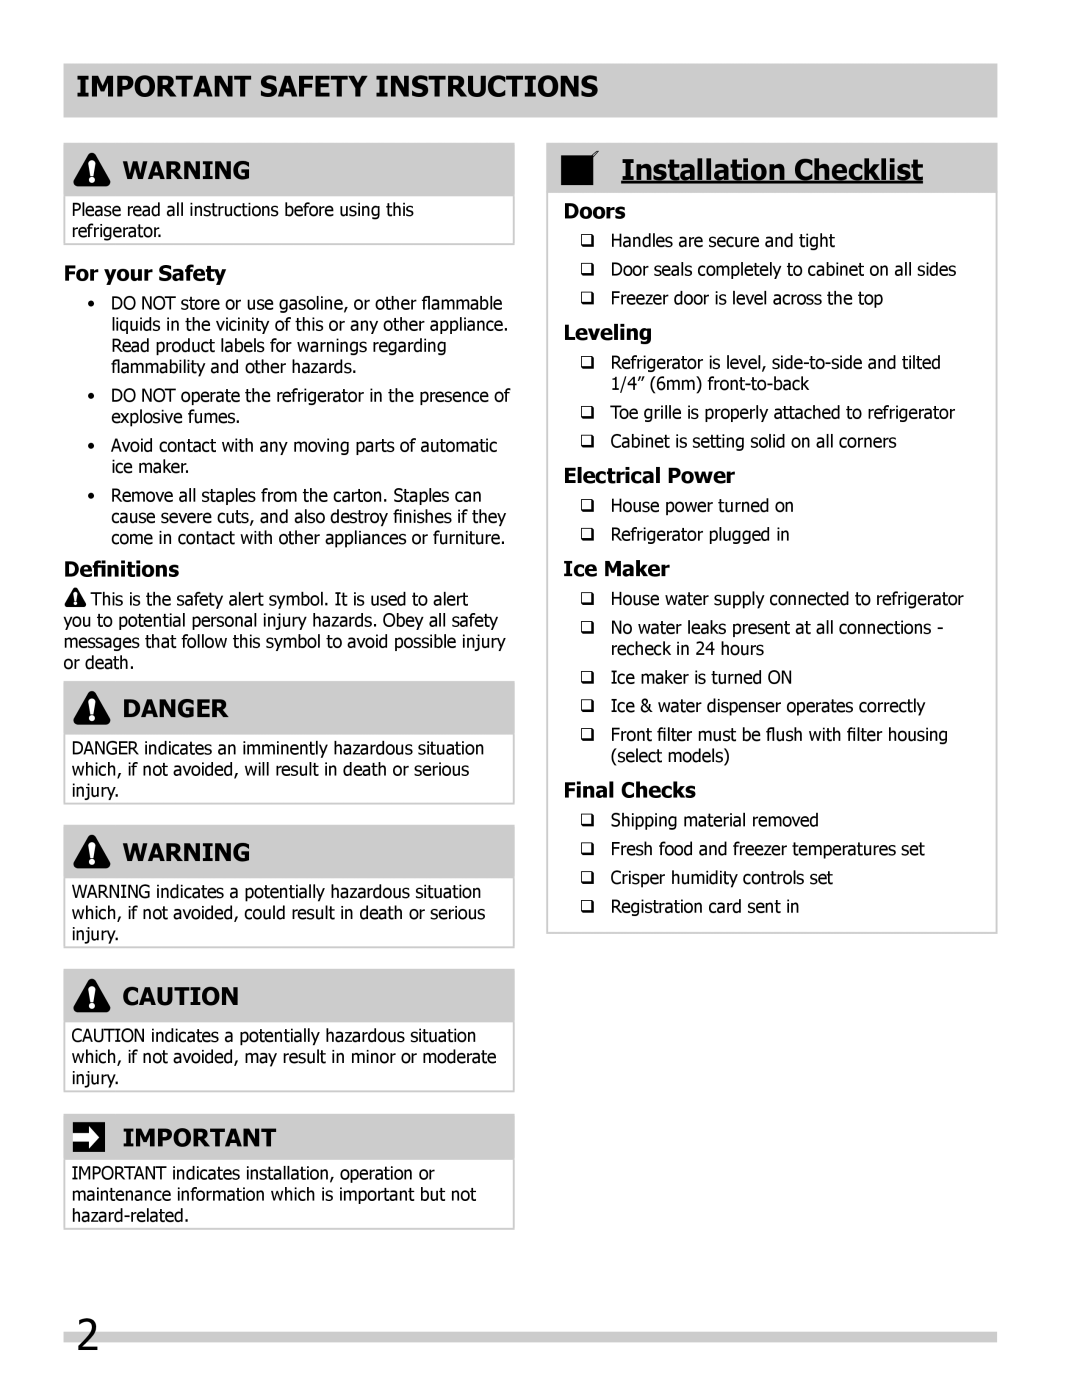 Frigidaire NFTR18X4LW Important Safety Instructions, Installation Checklist, Danger, For your Safety, Definitions, Doors 